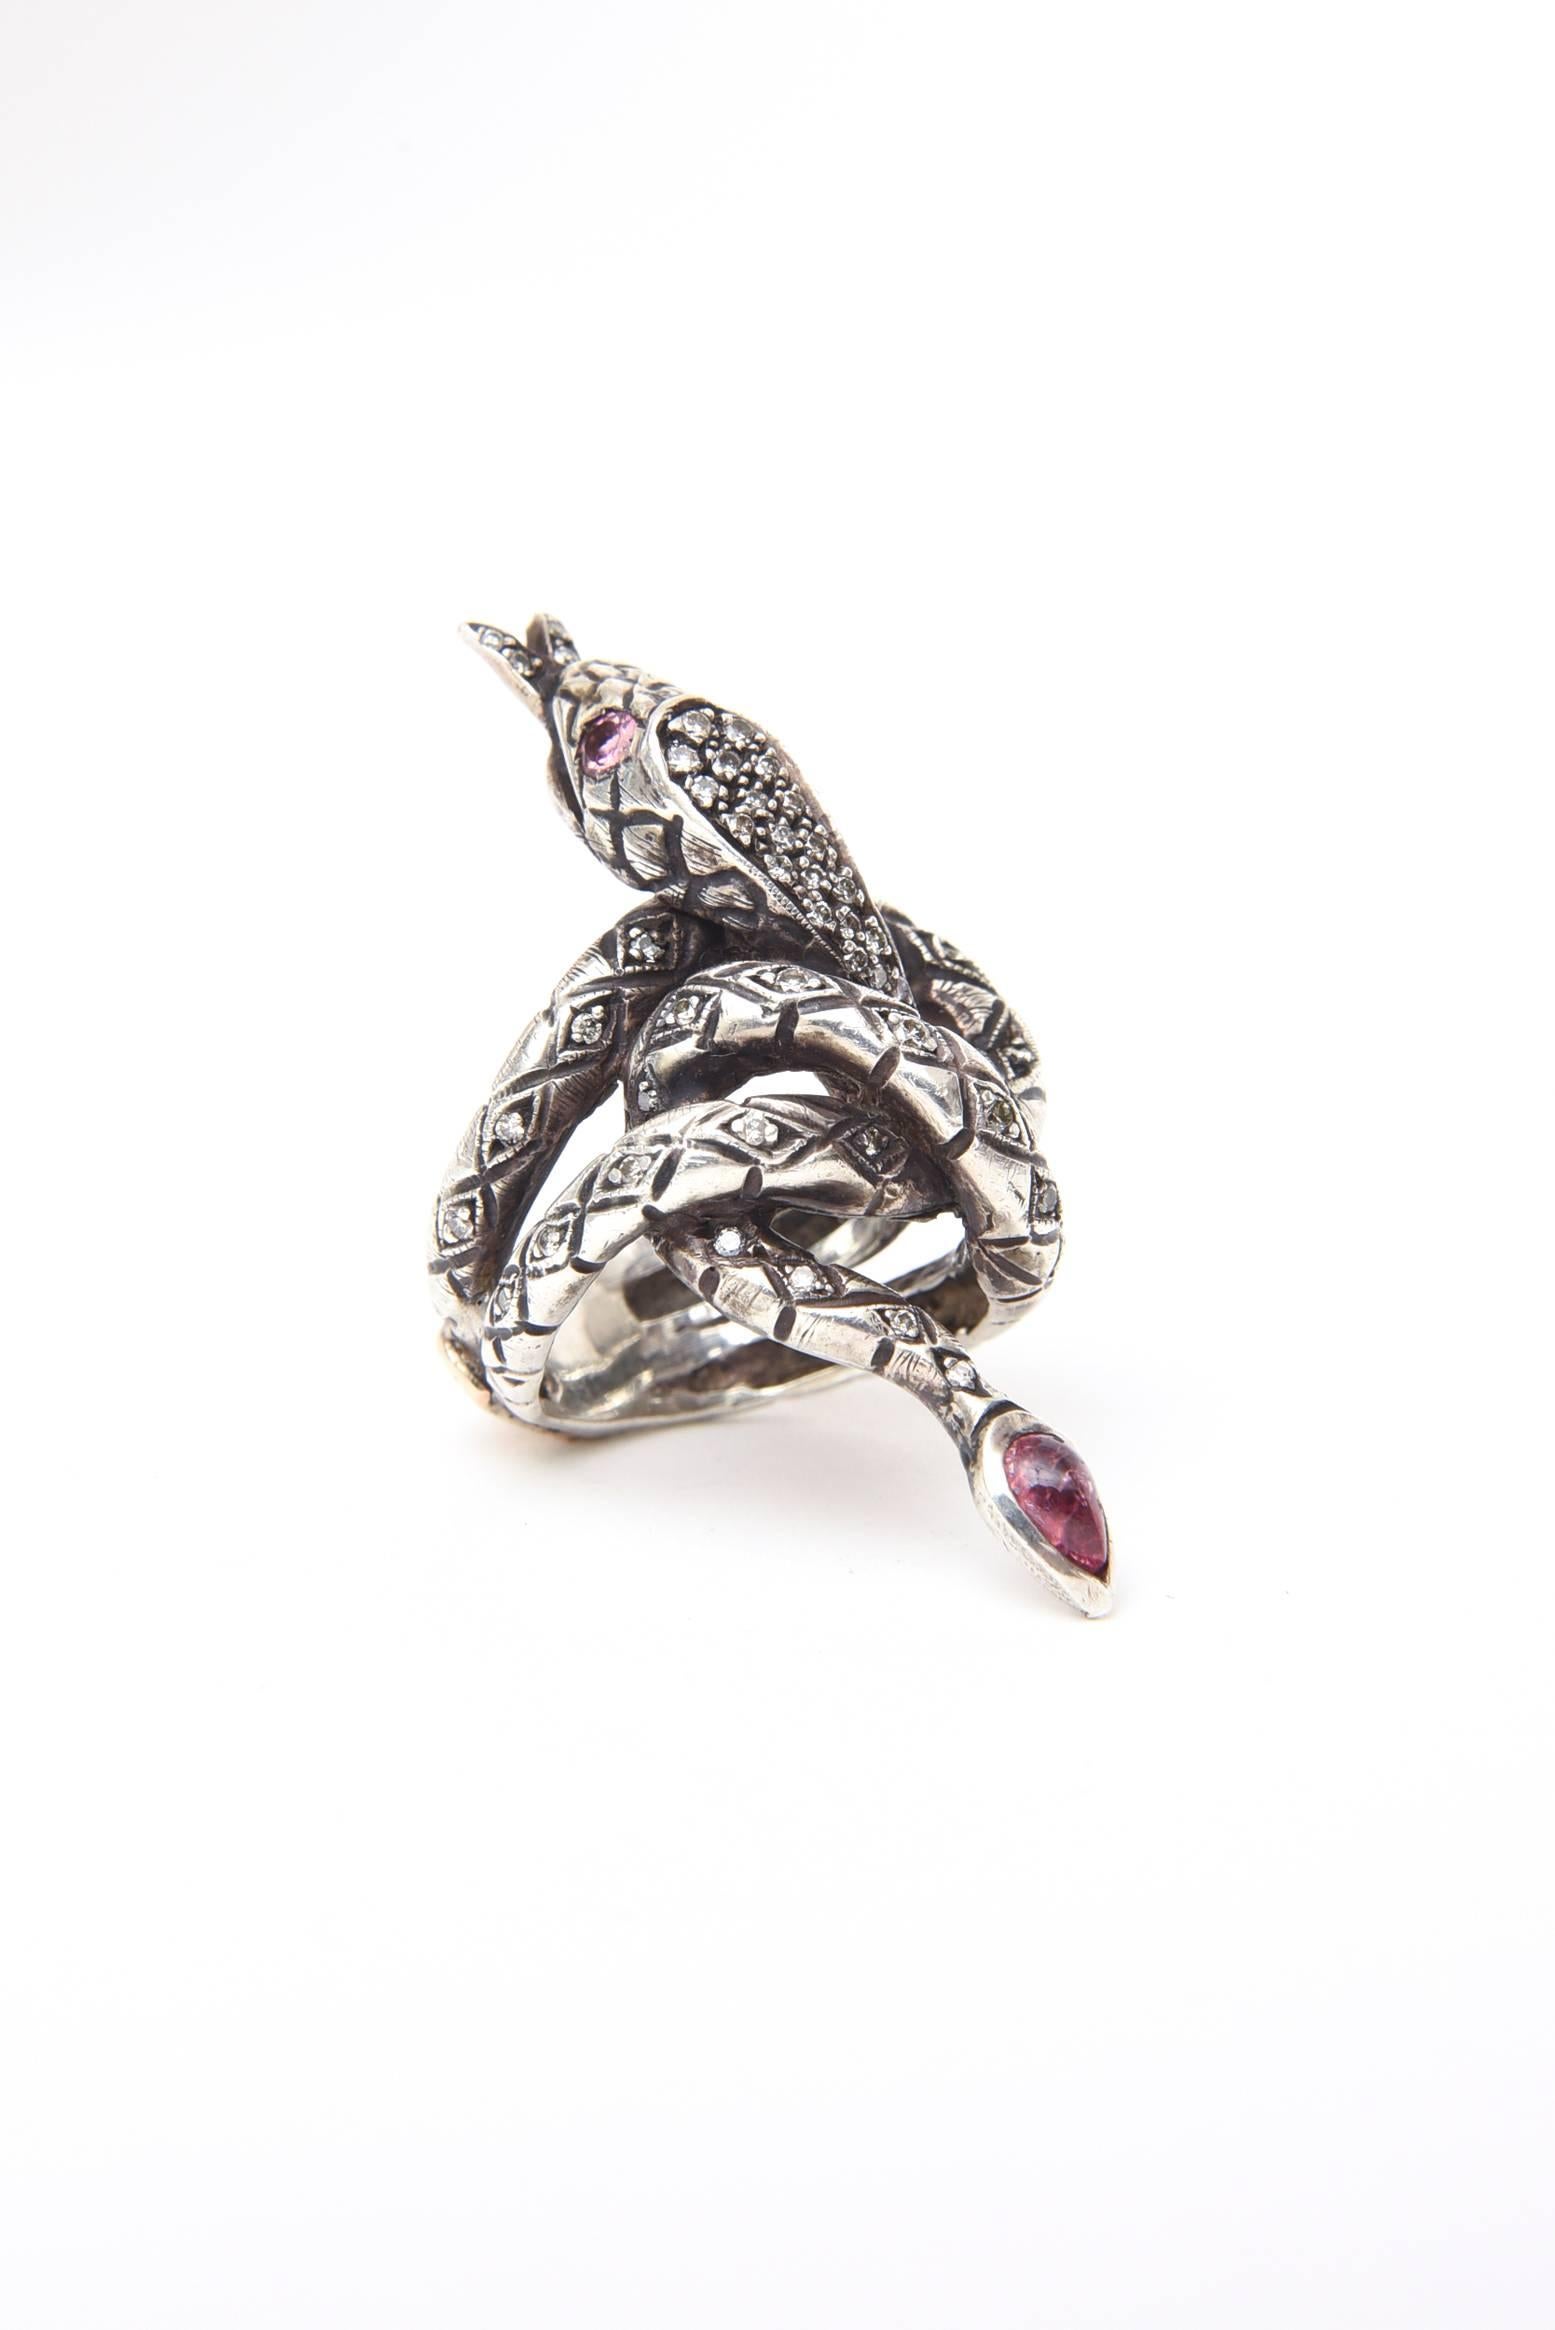 This dramatic, elongated, serpent/snake ring has diamonds set in Sterling Silver.
The coiled serpent has a tourmaline tail and ruby eyes. 
Signed KK in 14k gold n the back of the band.
Size 5 ring, 2 inches long, by 1 inch wide, by 1 1/4 high. 
This